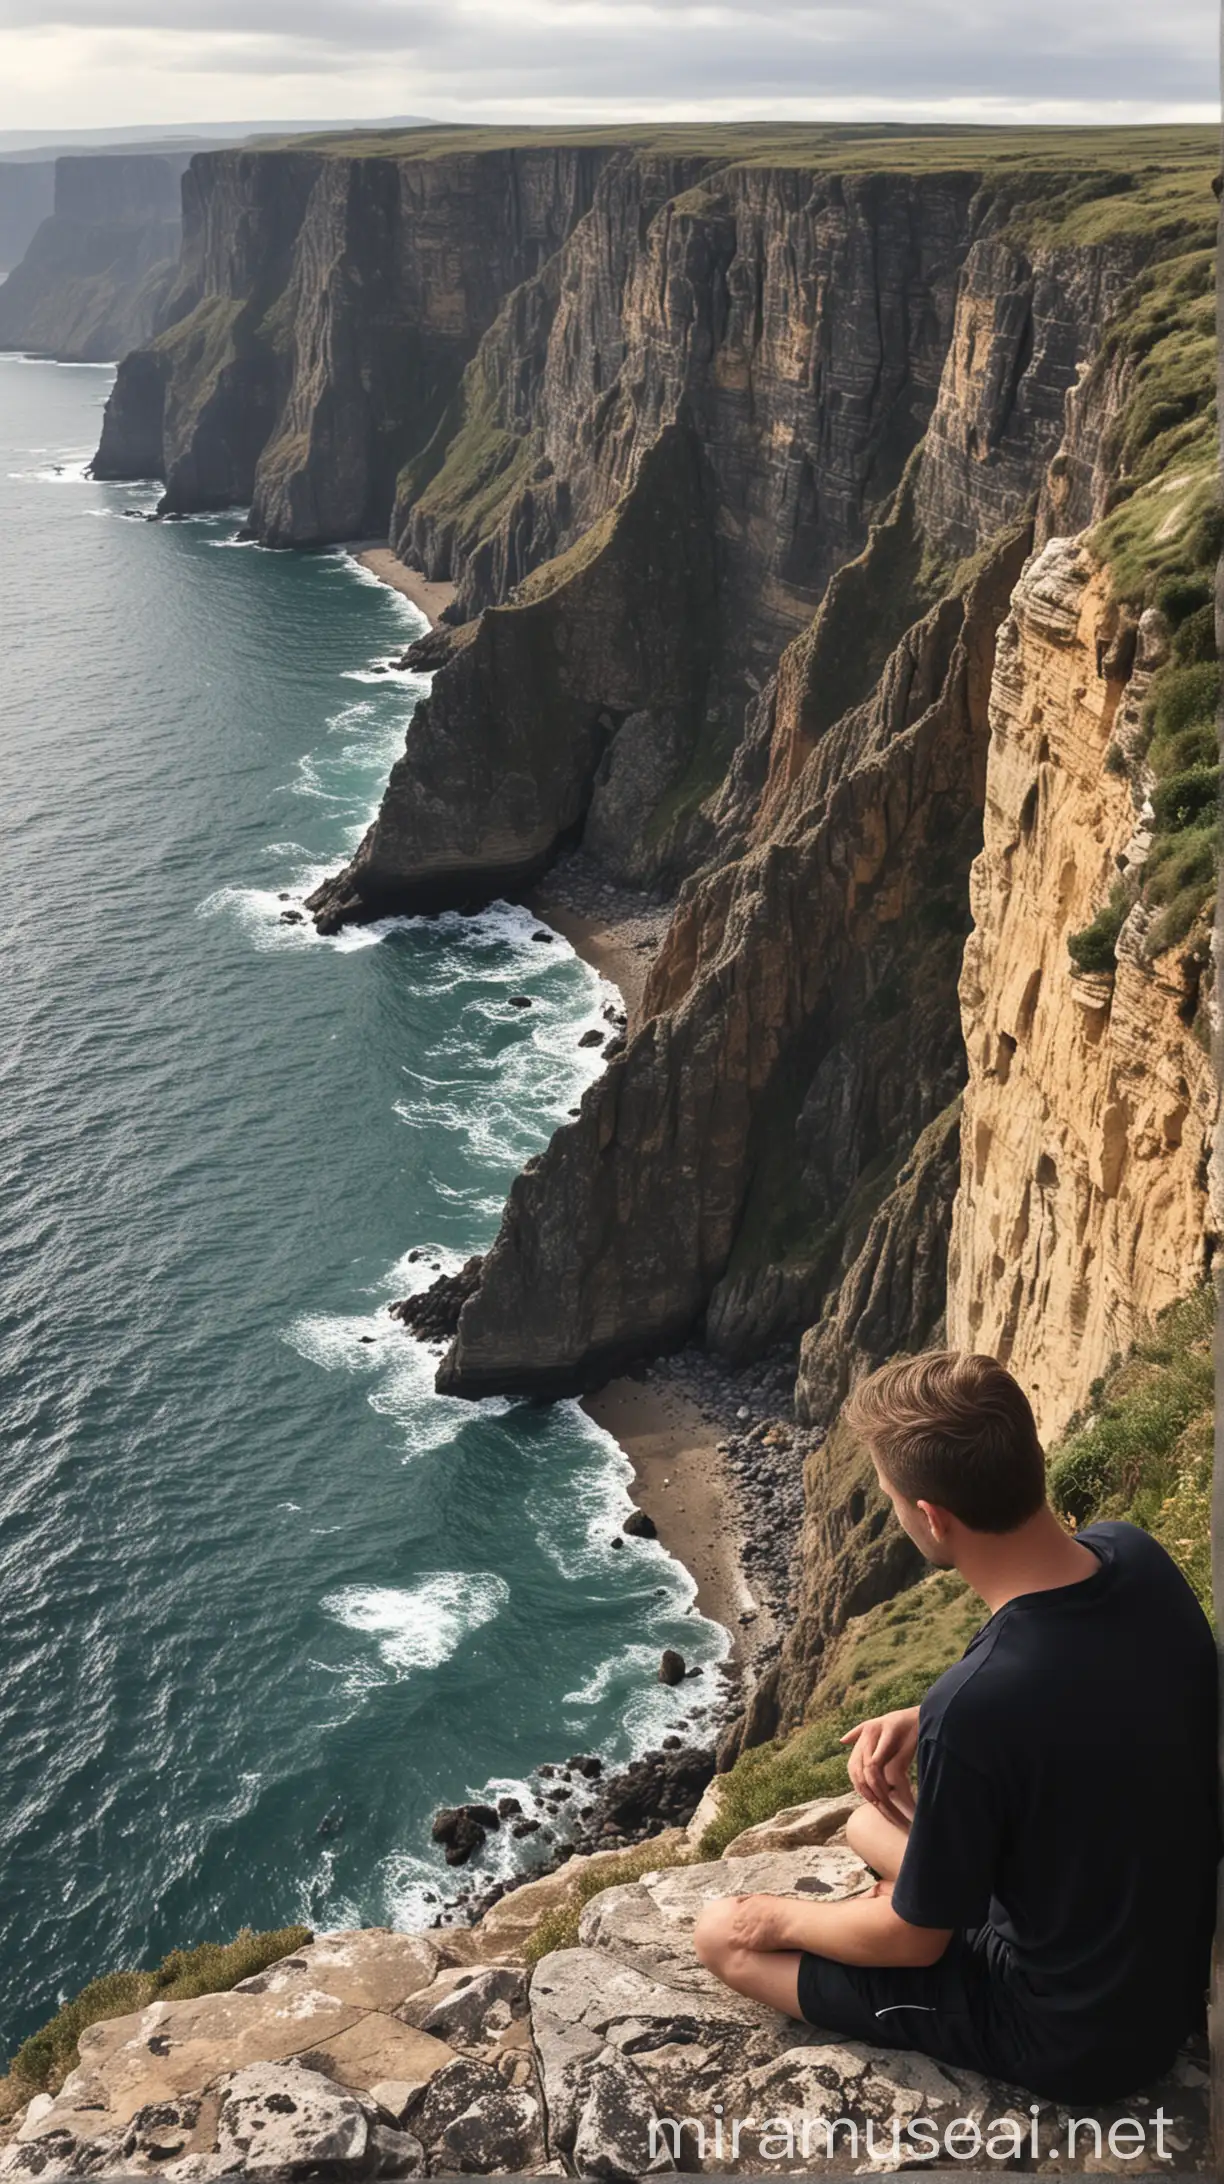 Donal bebek overlooking the stunning view of the Cliffs...